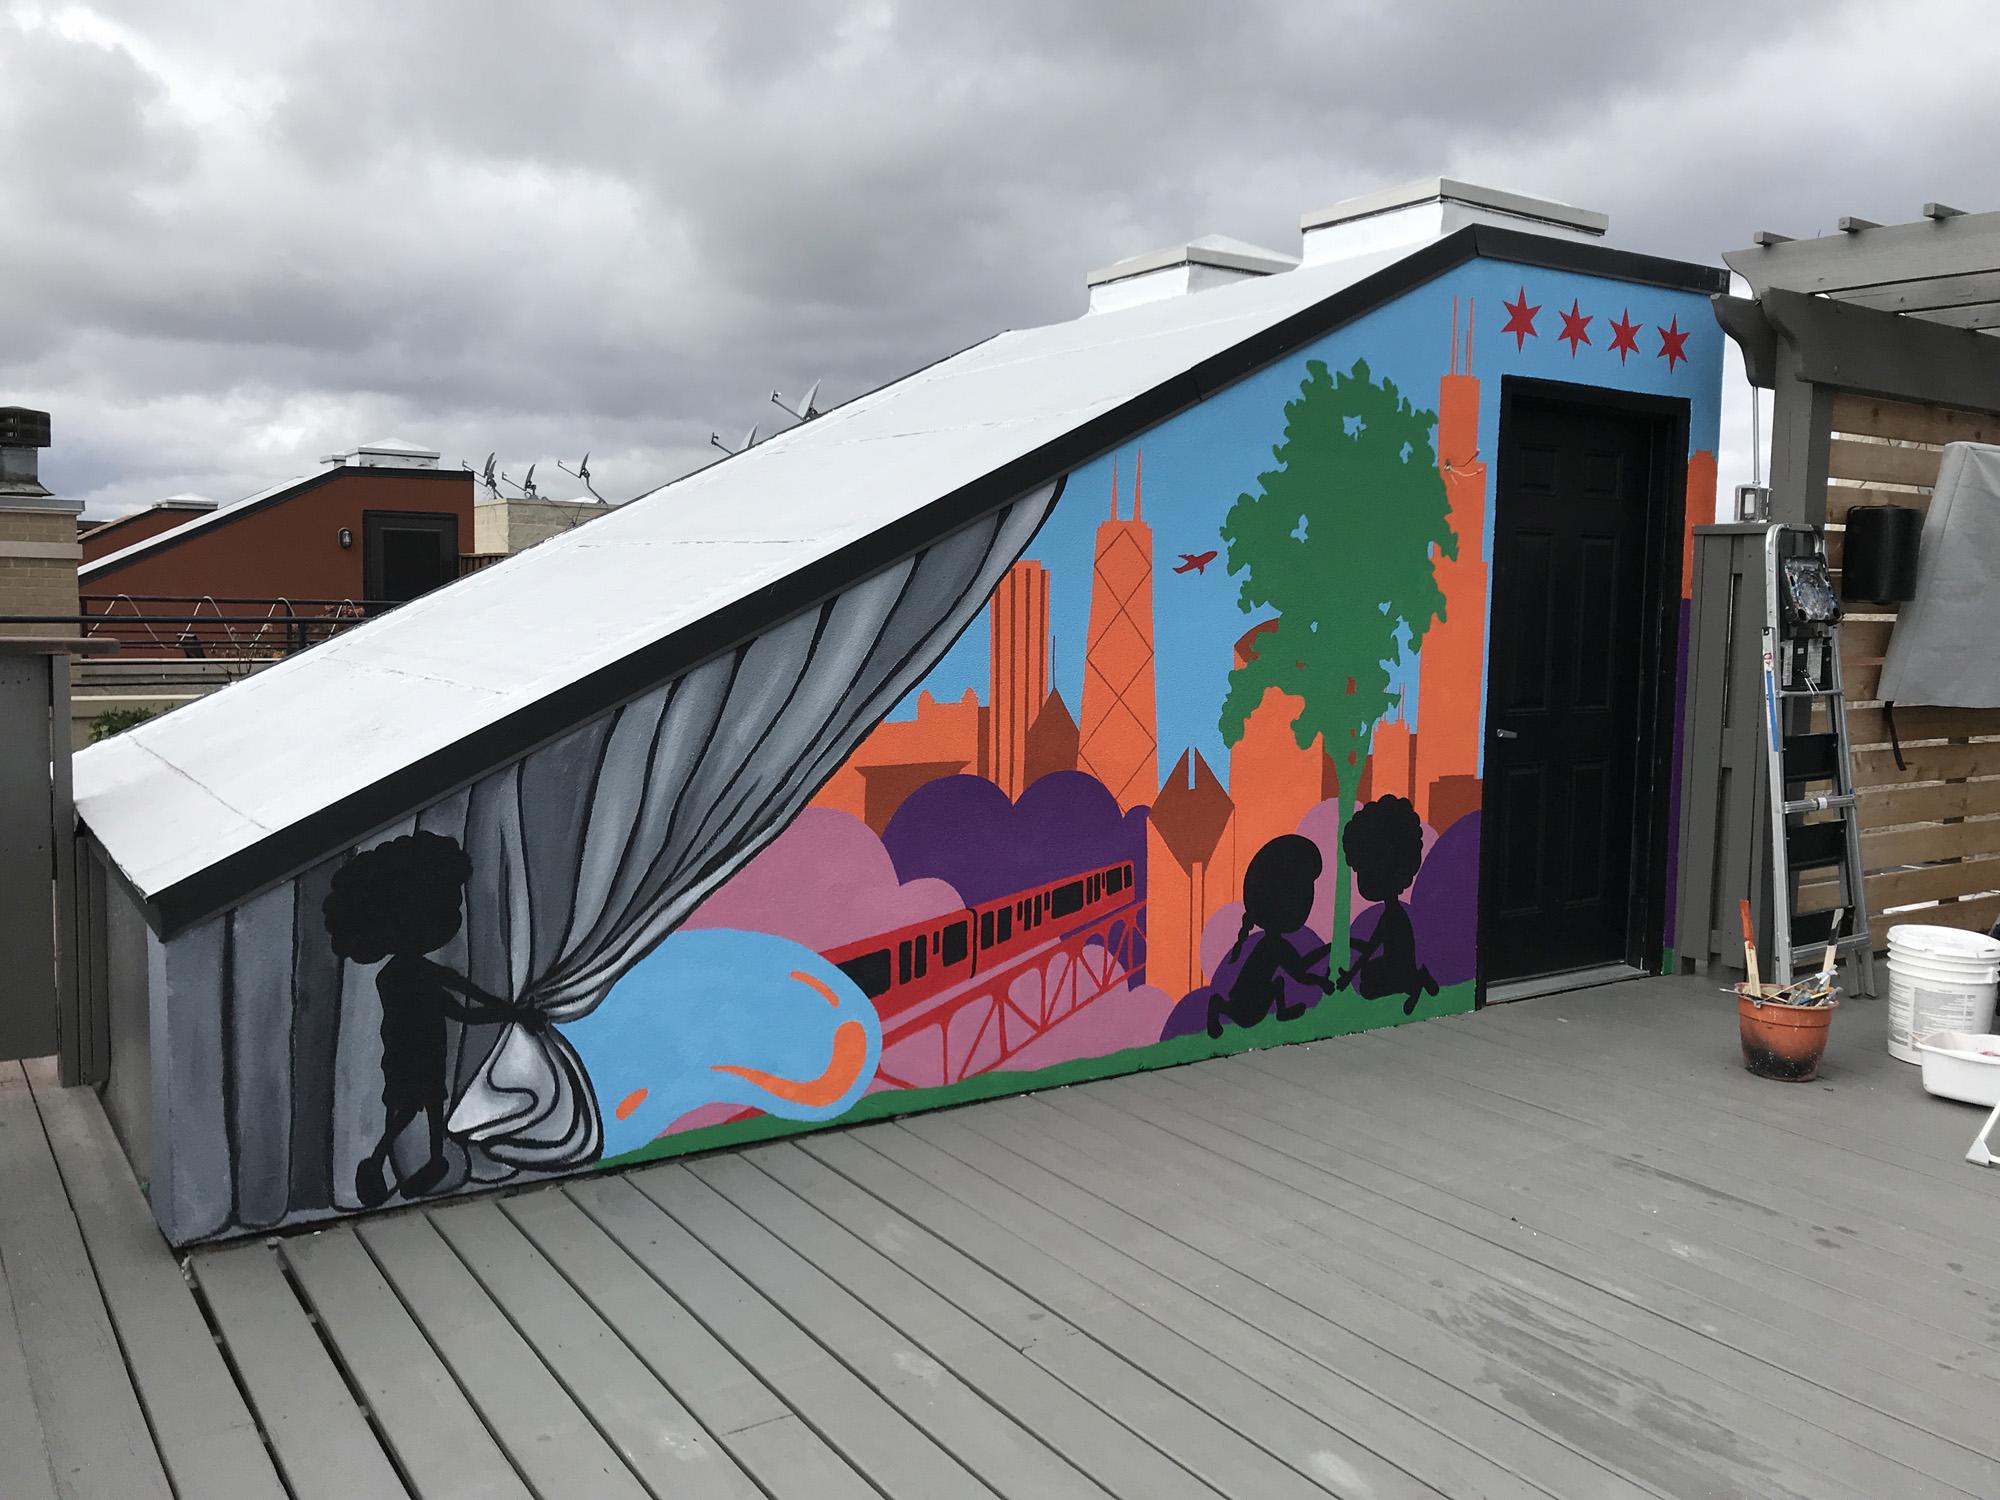 Painted mural on rooftop patio